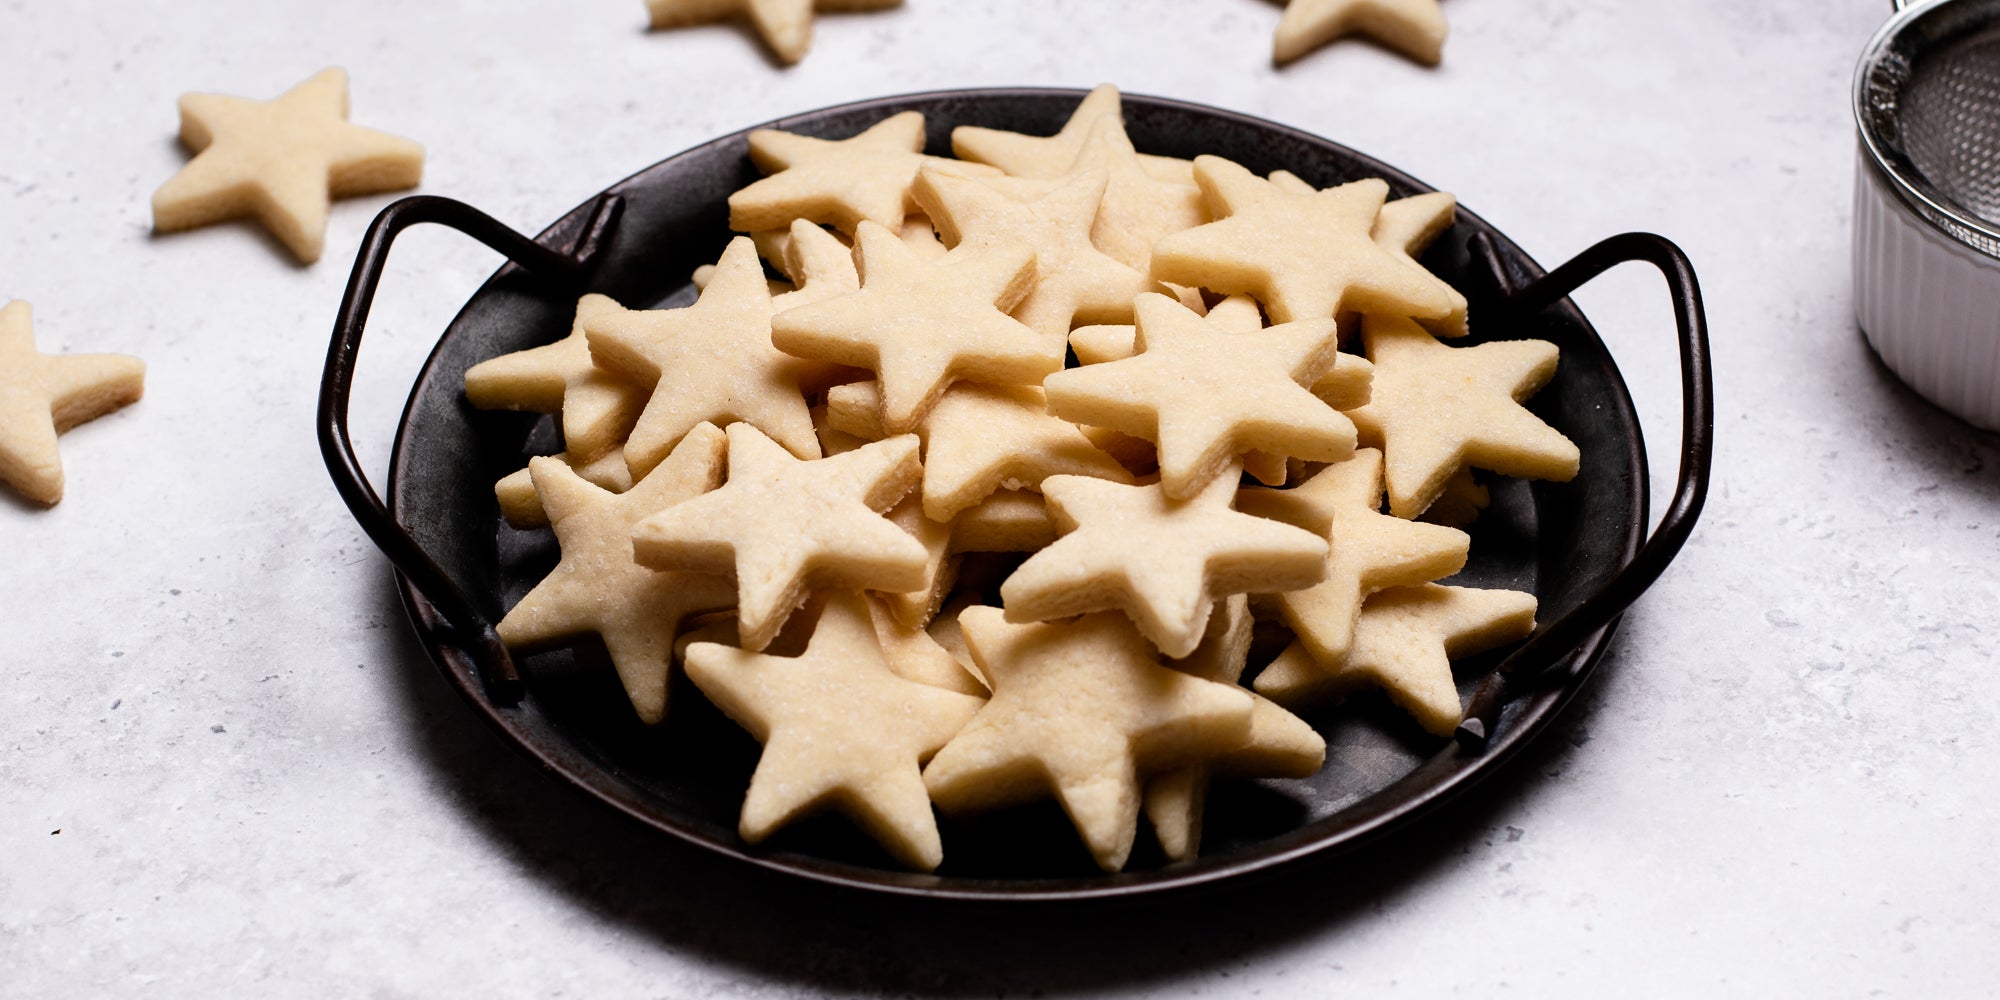 A side on view of star shaped vegan biscuits in a bowl